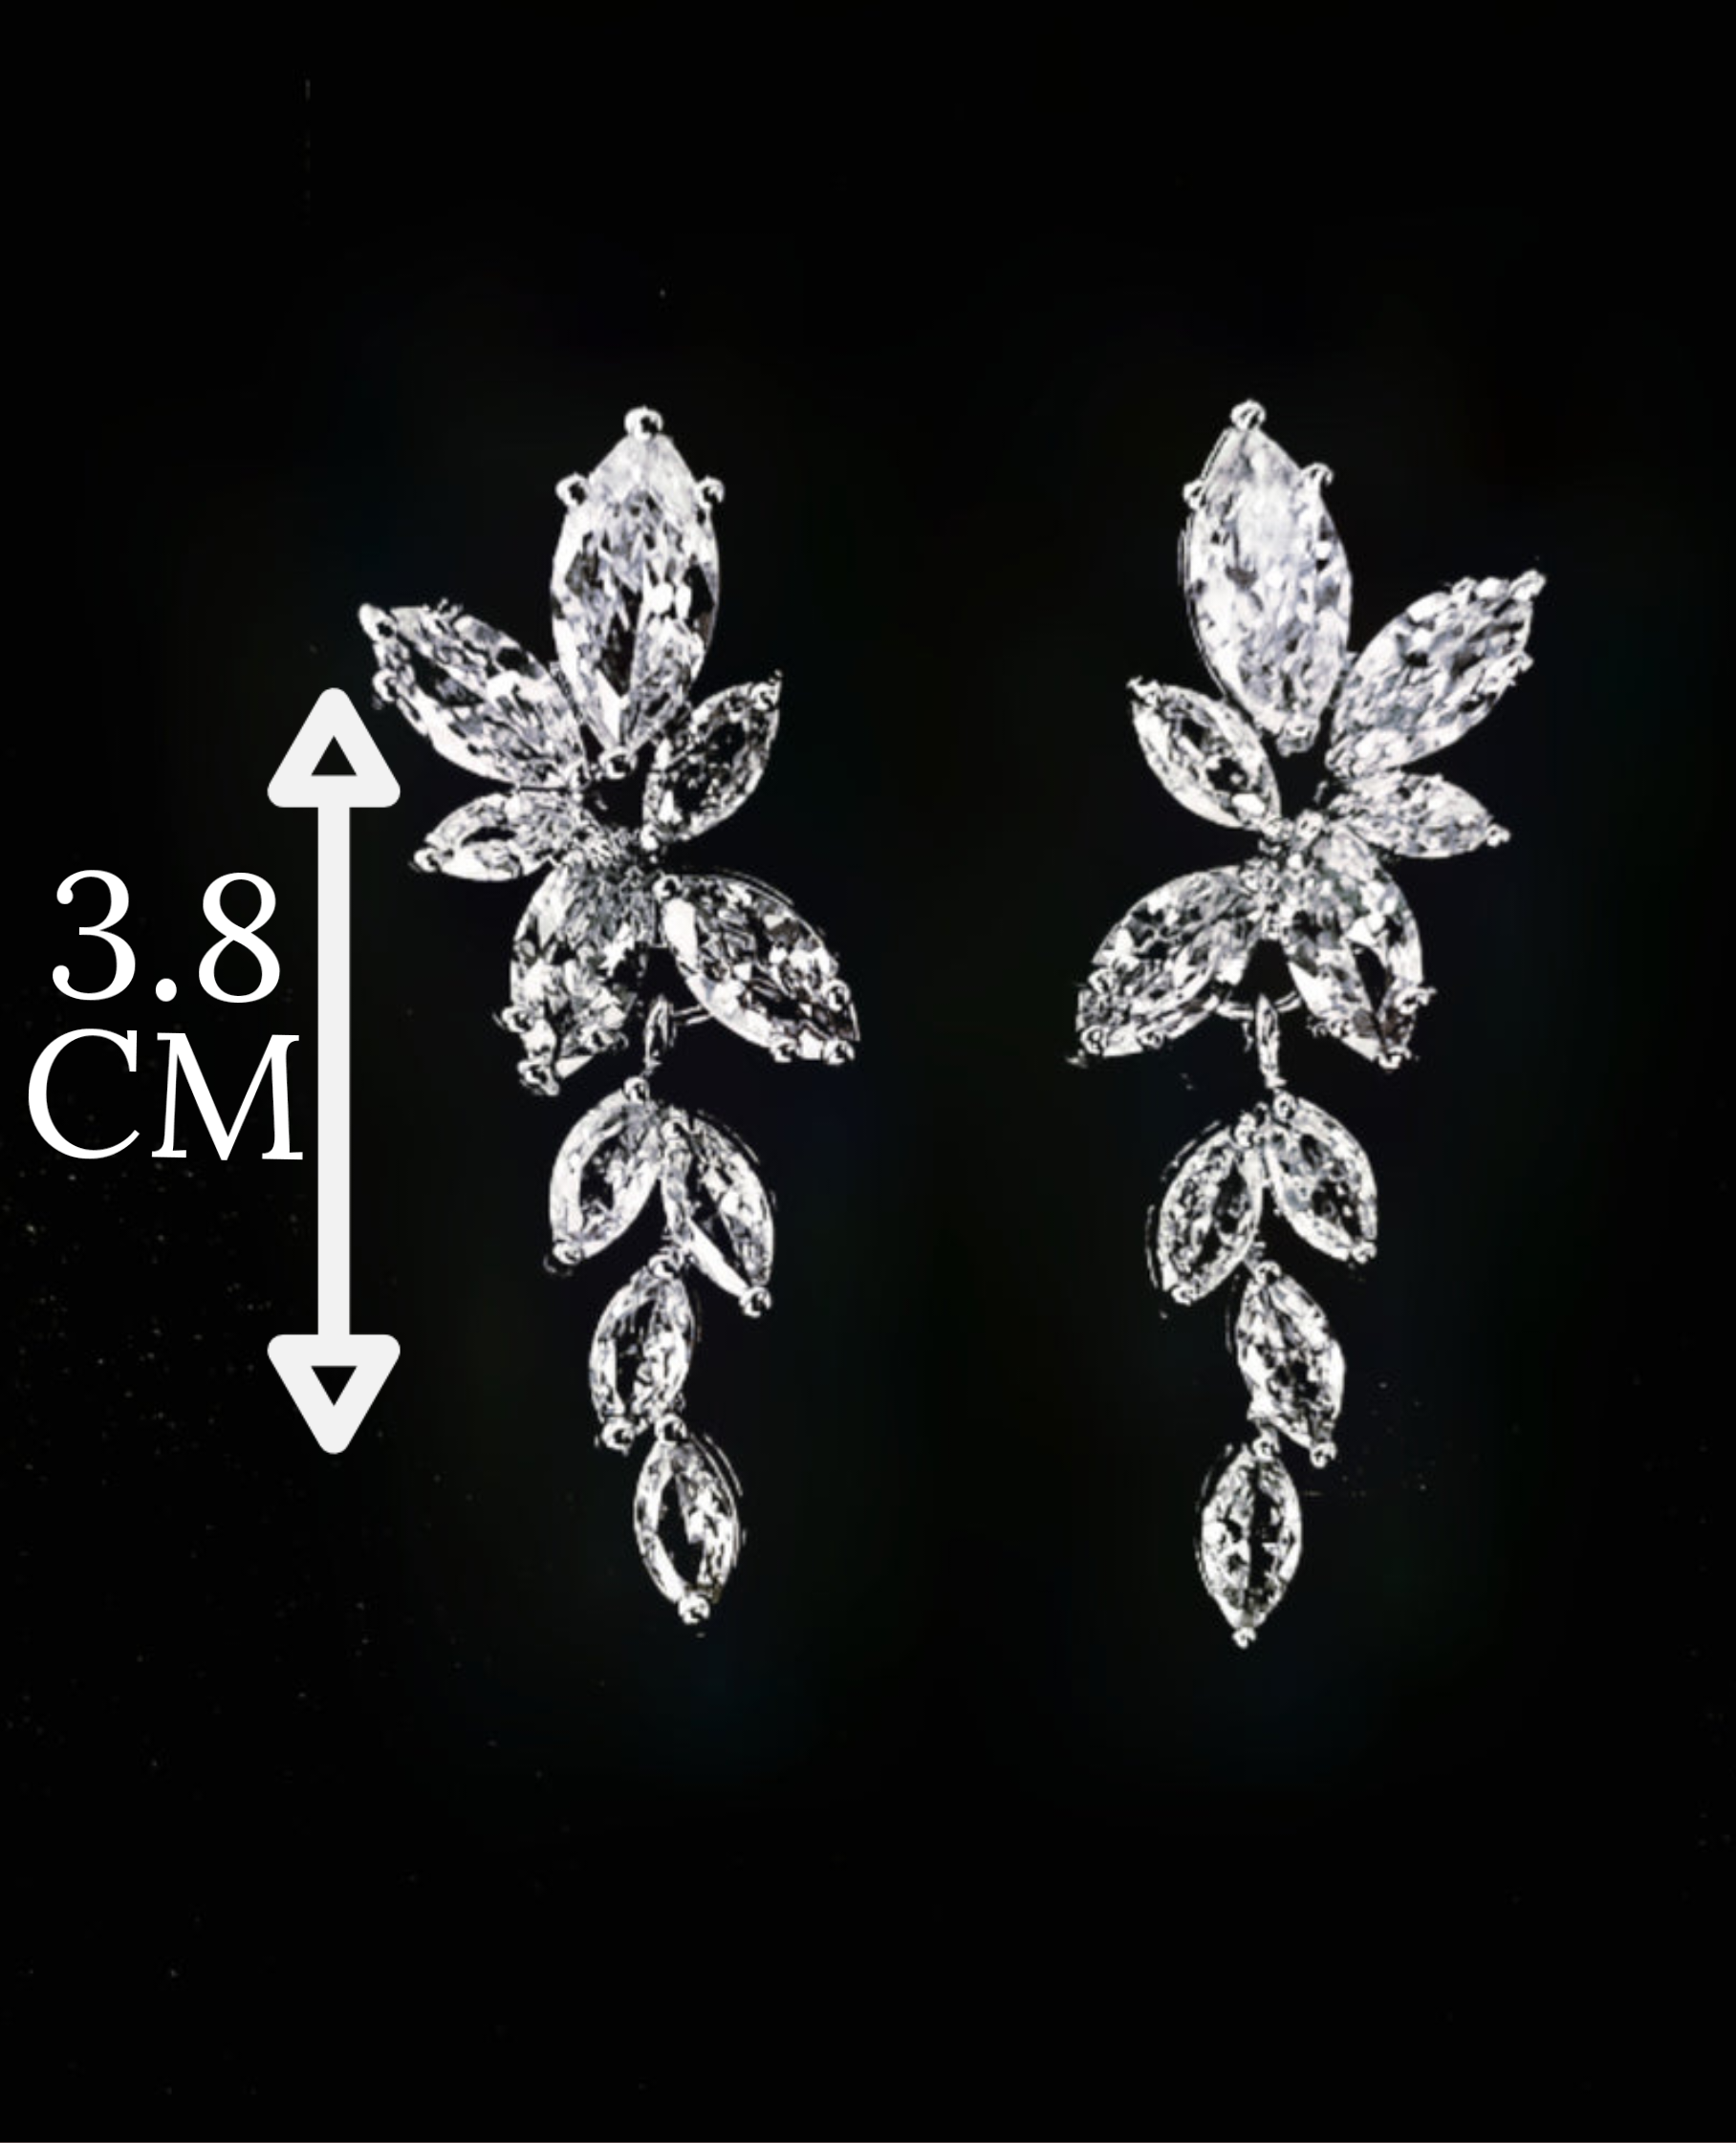 A close-up of a pair of silver earrings with white diamonds. The earrings are simple in design and the diamonds are sparkling. The earrings are very elegant and would be perfect for a special occasion. with measures.